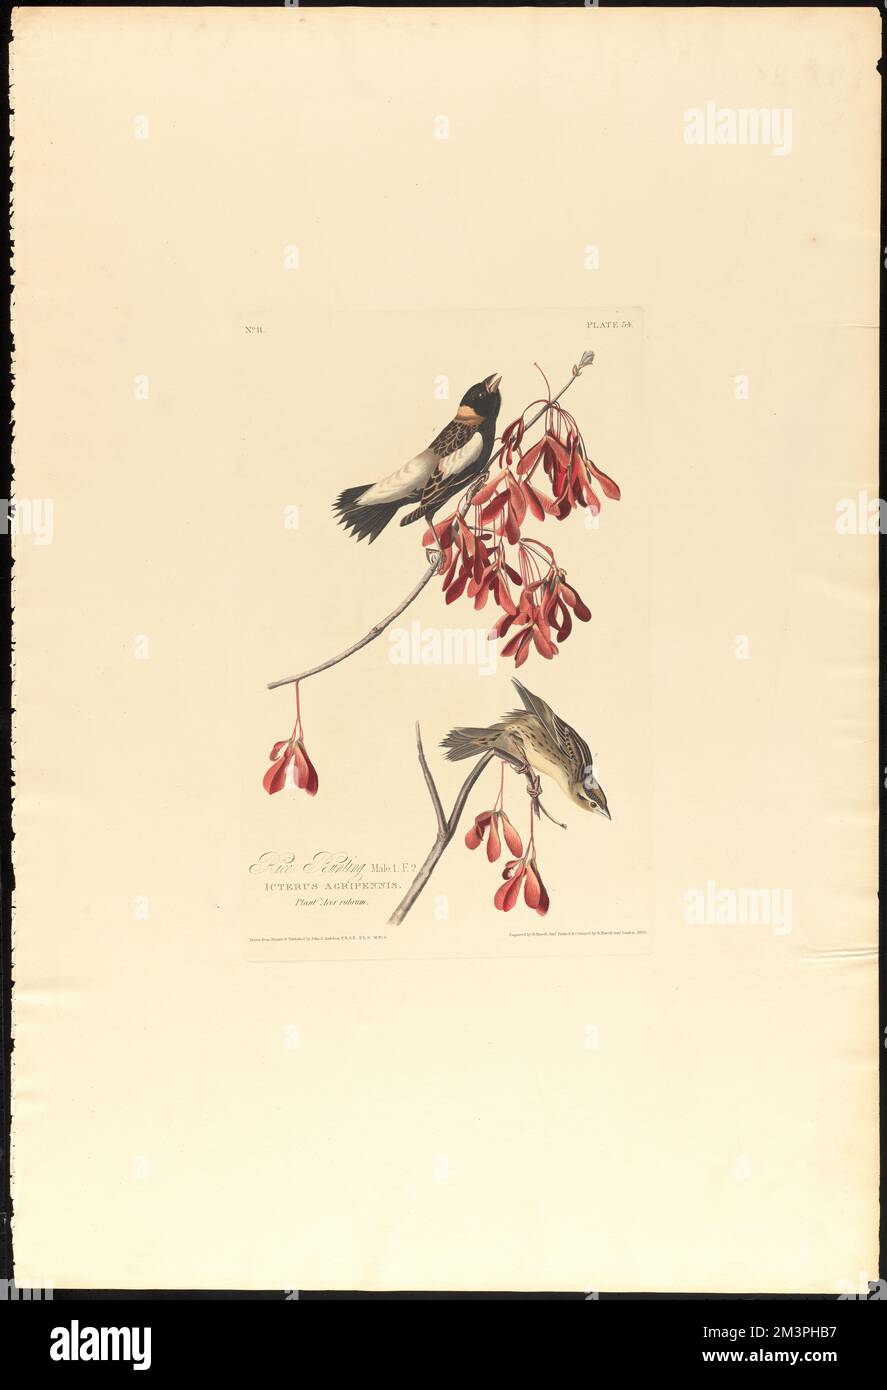 Rice bunting : Male, 1. F, 2. Icterus agripennis. Plant acer rubrum. c.2 v.1 plate 54 , Birds, Maples, Bobolink, Red maple. The Birds of America- From Original Drawings by John James Audubon Stock Photo